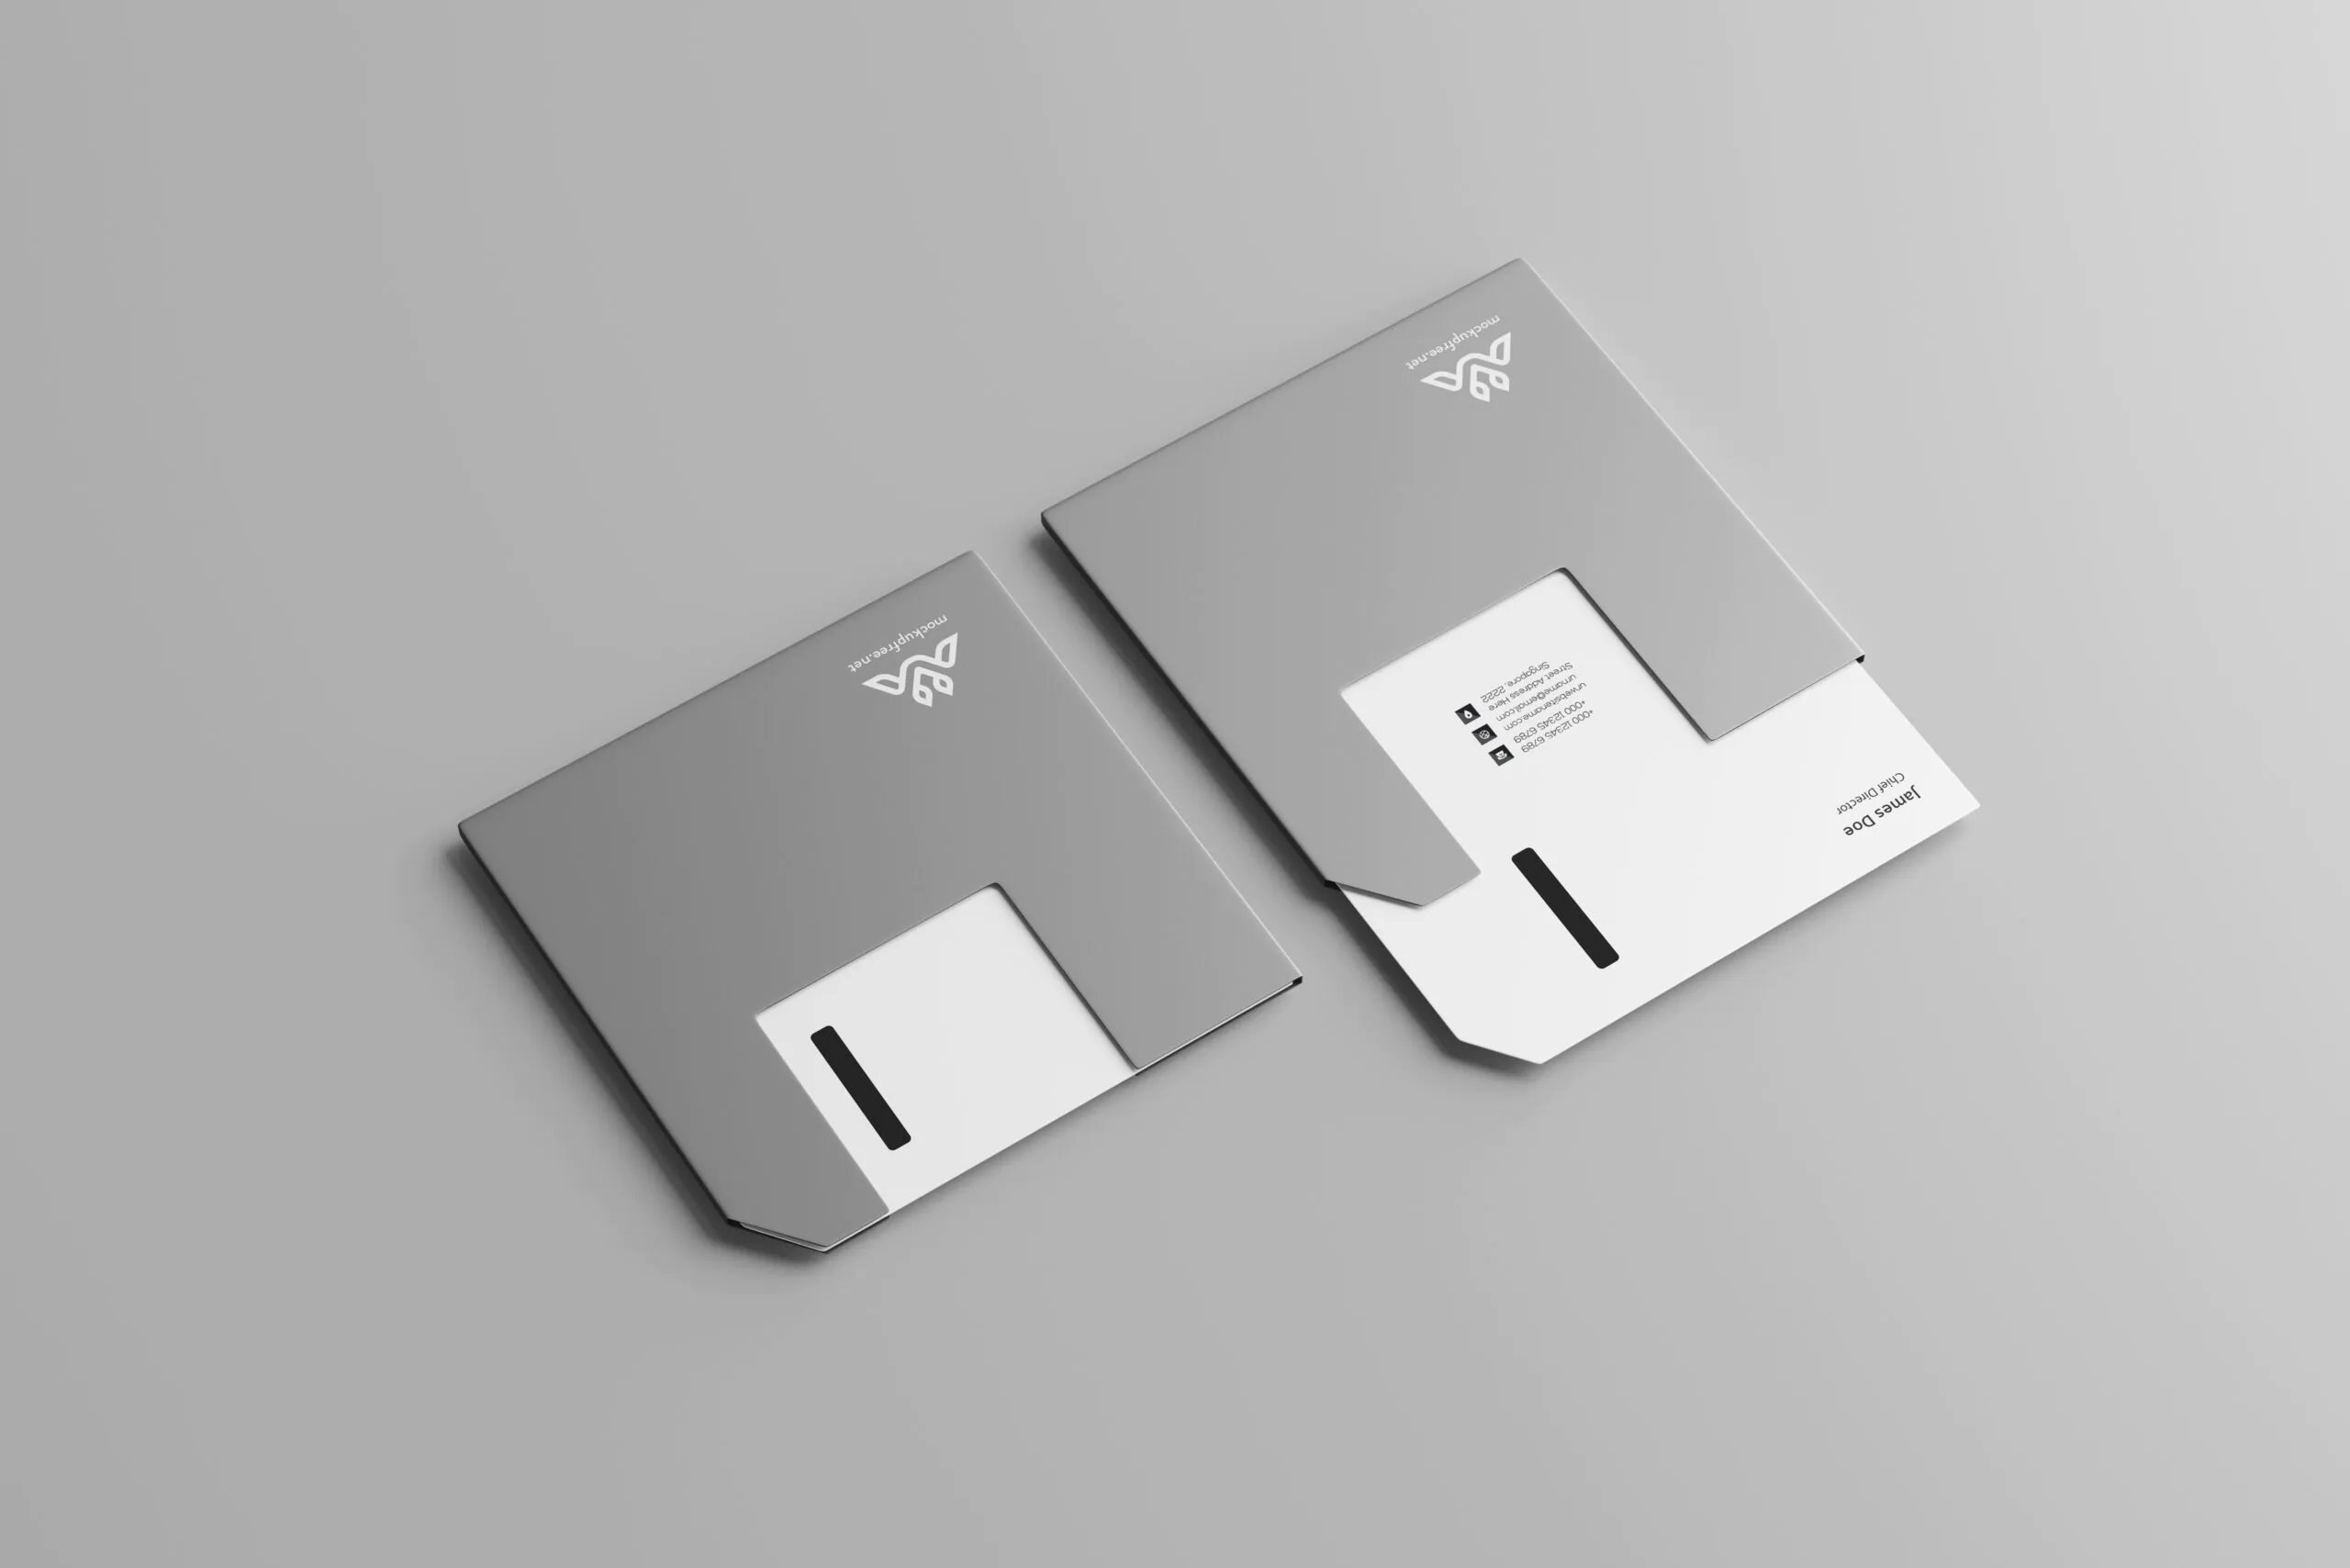 5 Mockups of Floppy Disk Shaped Business Cards in Various Views FREE PSD